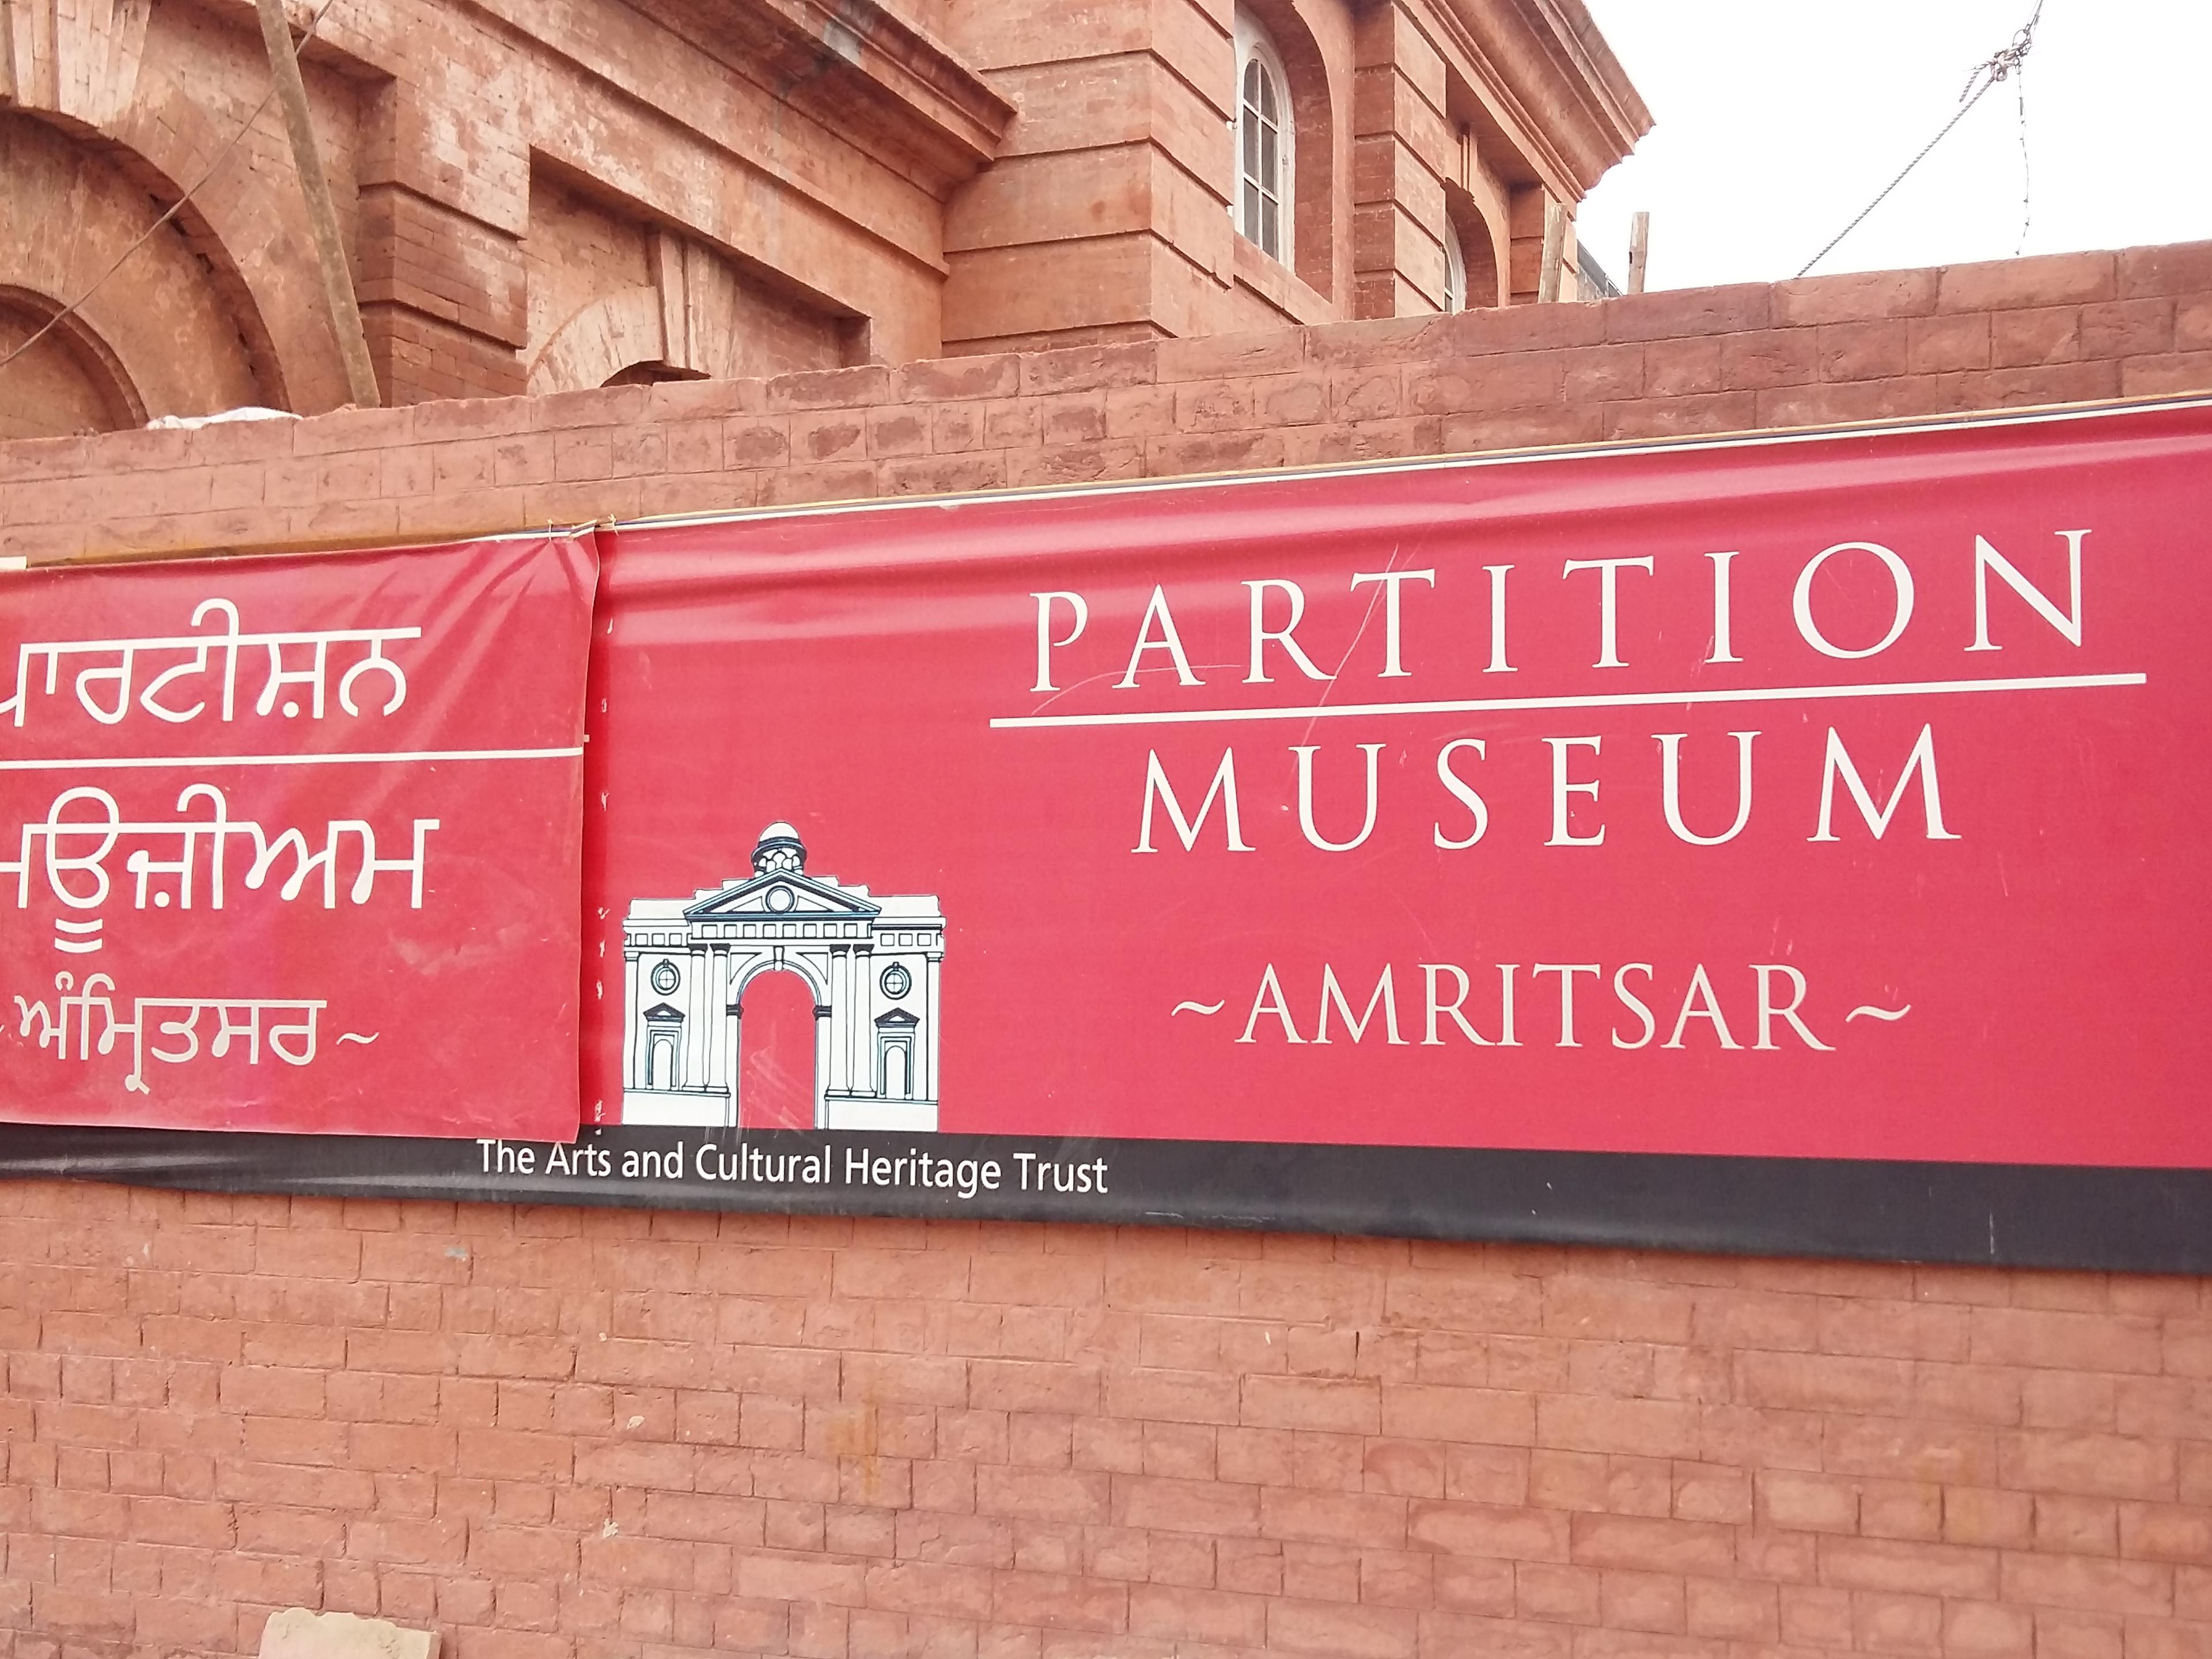 The Partititon Museum, in the northern Indian city of Amristar opened in August 2017. (Photo: Bismil